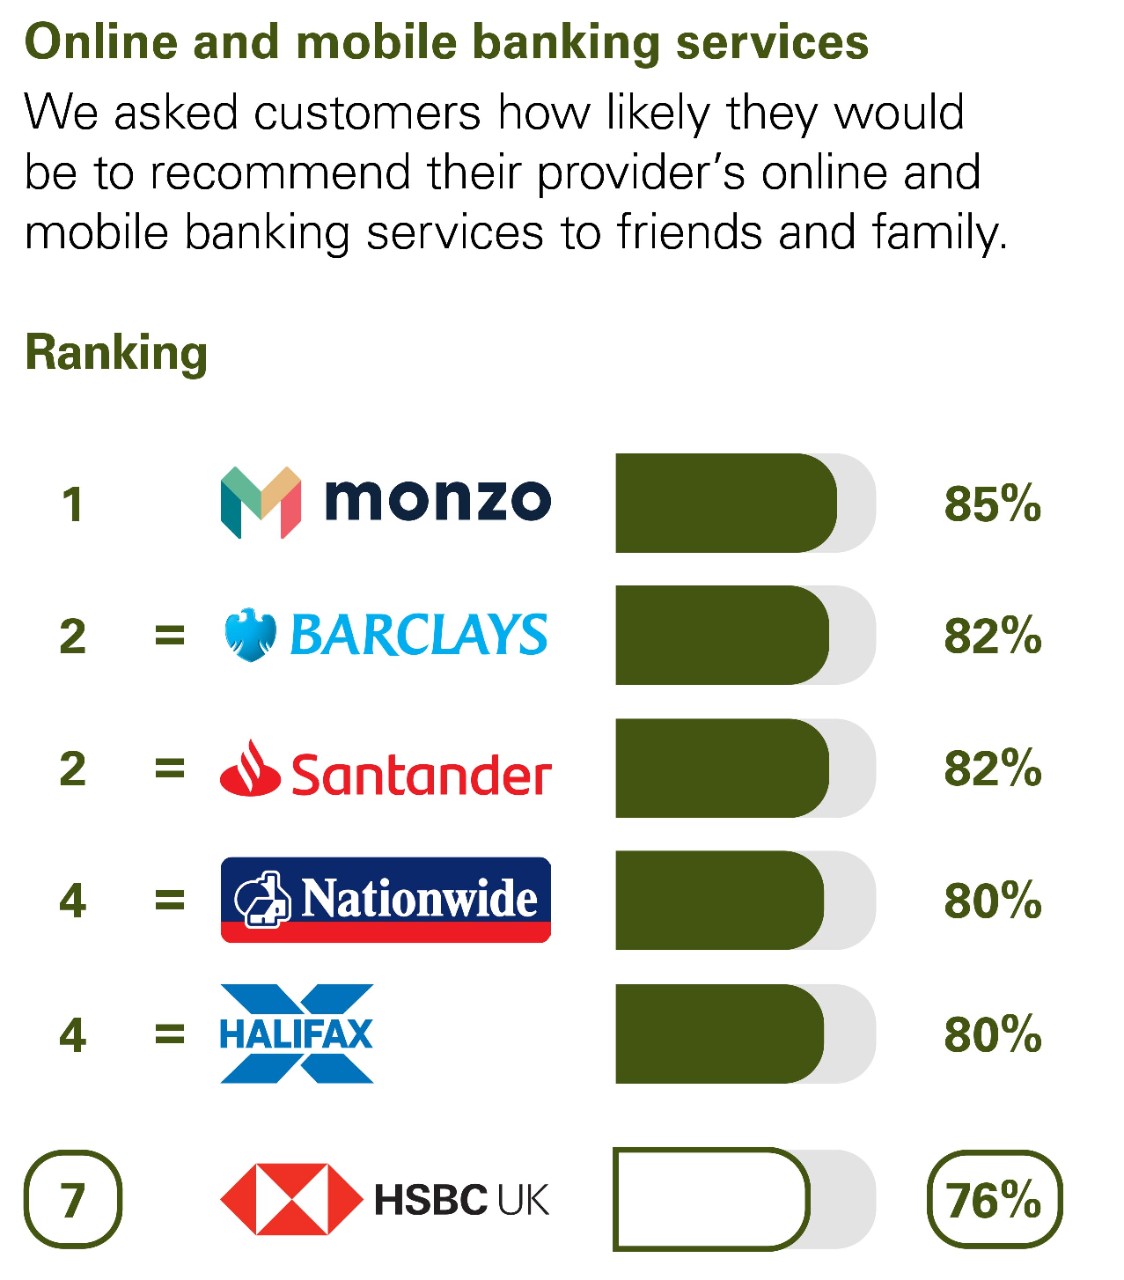 Online and mobile banking services. We asked customers how likely they would be to recommend their provider’s online and mobile banking services to friends and family. Ranking: 1 Monzo 85% equal 2 Barclays 82% equal 2 Santander 82% equal 4 Nationwide 80% equal 4 Halifax 80% 7 HSBC UK 76%.